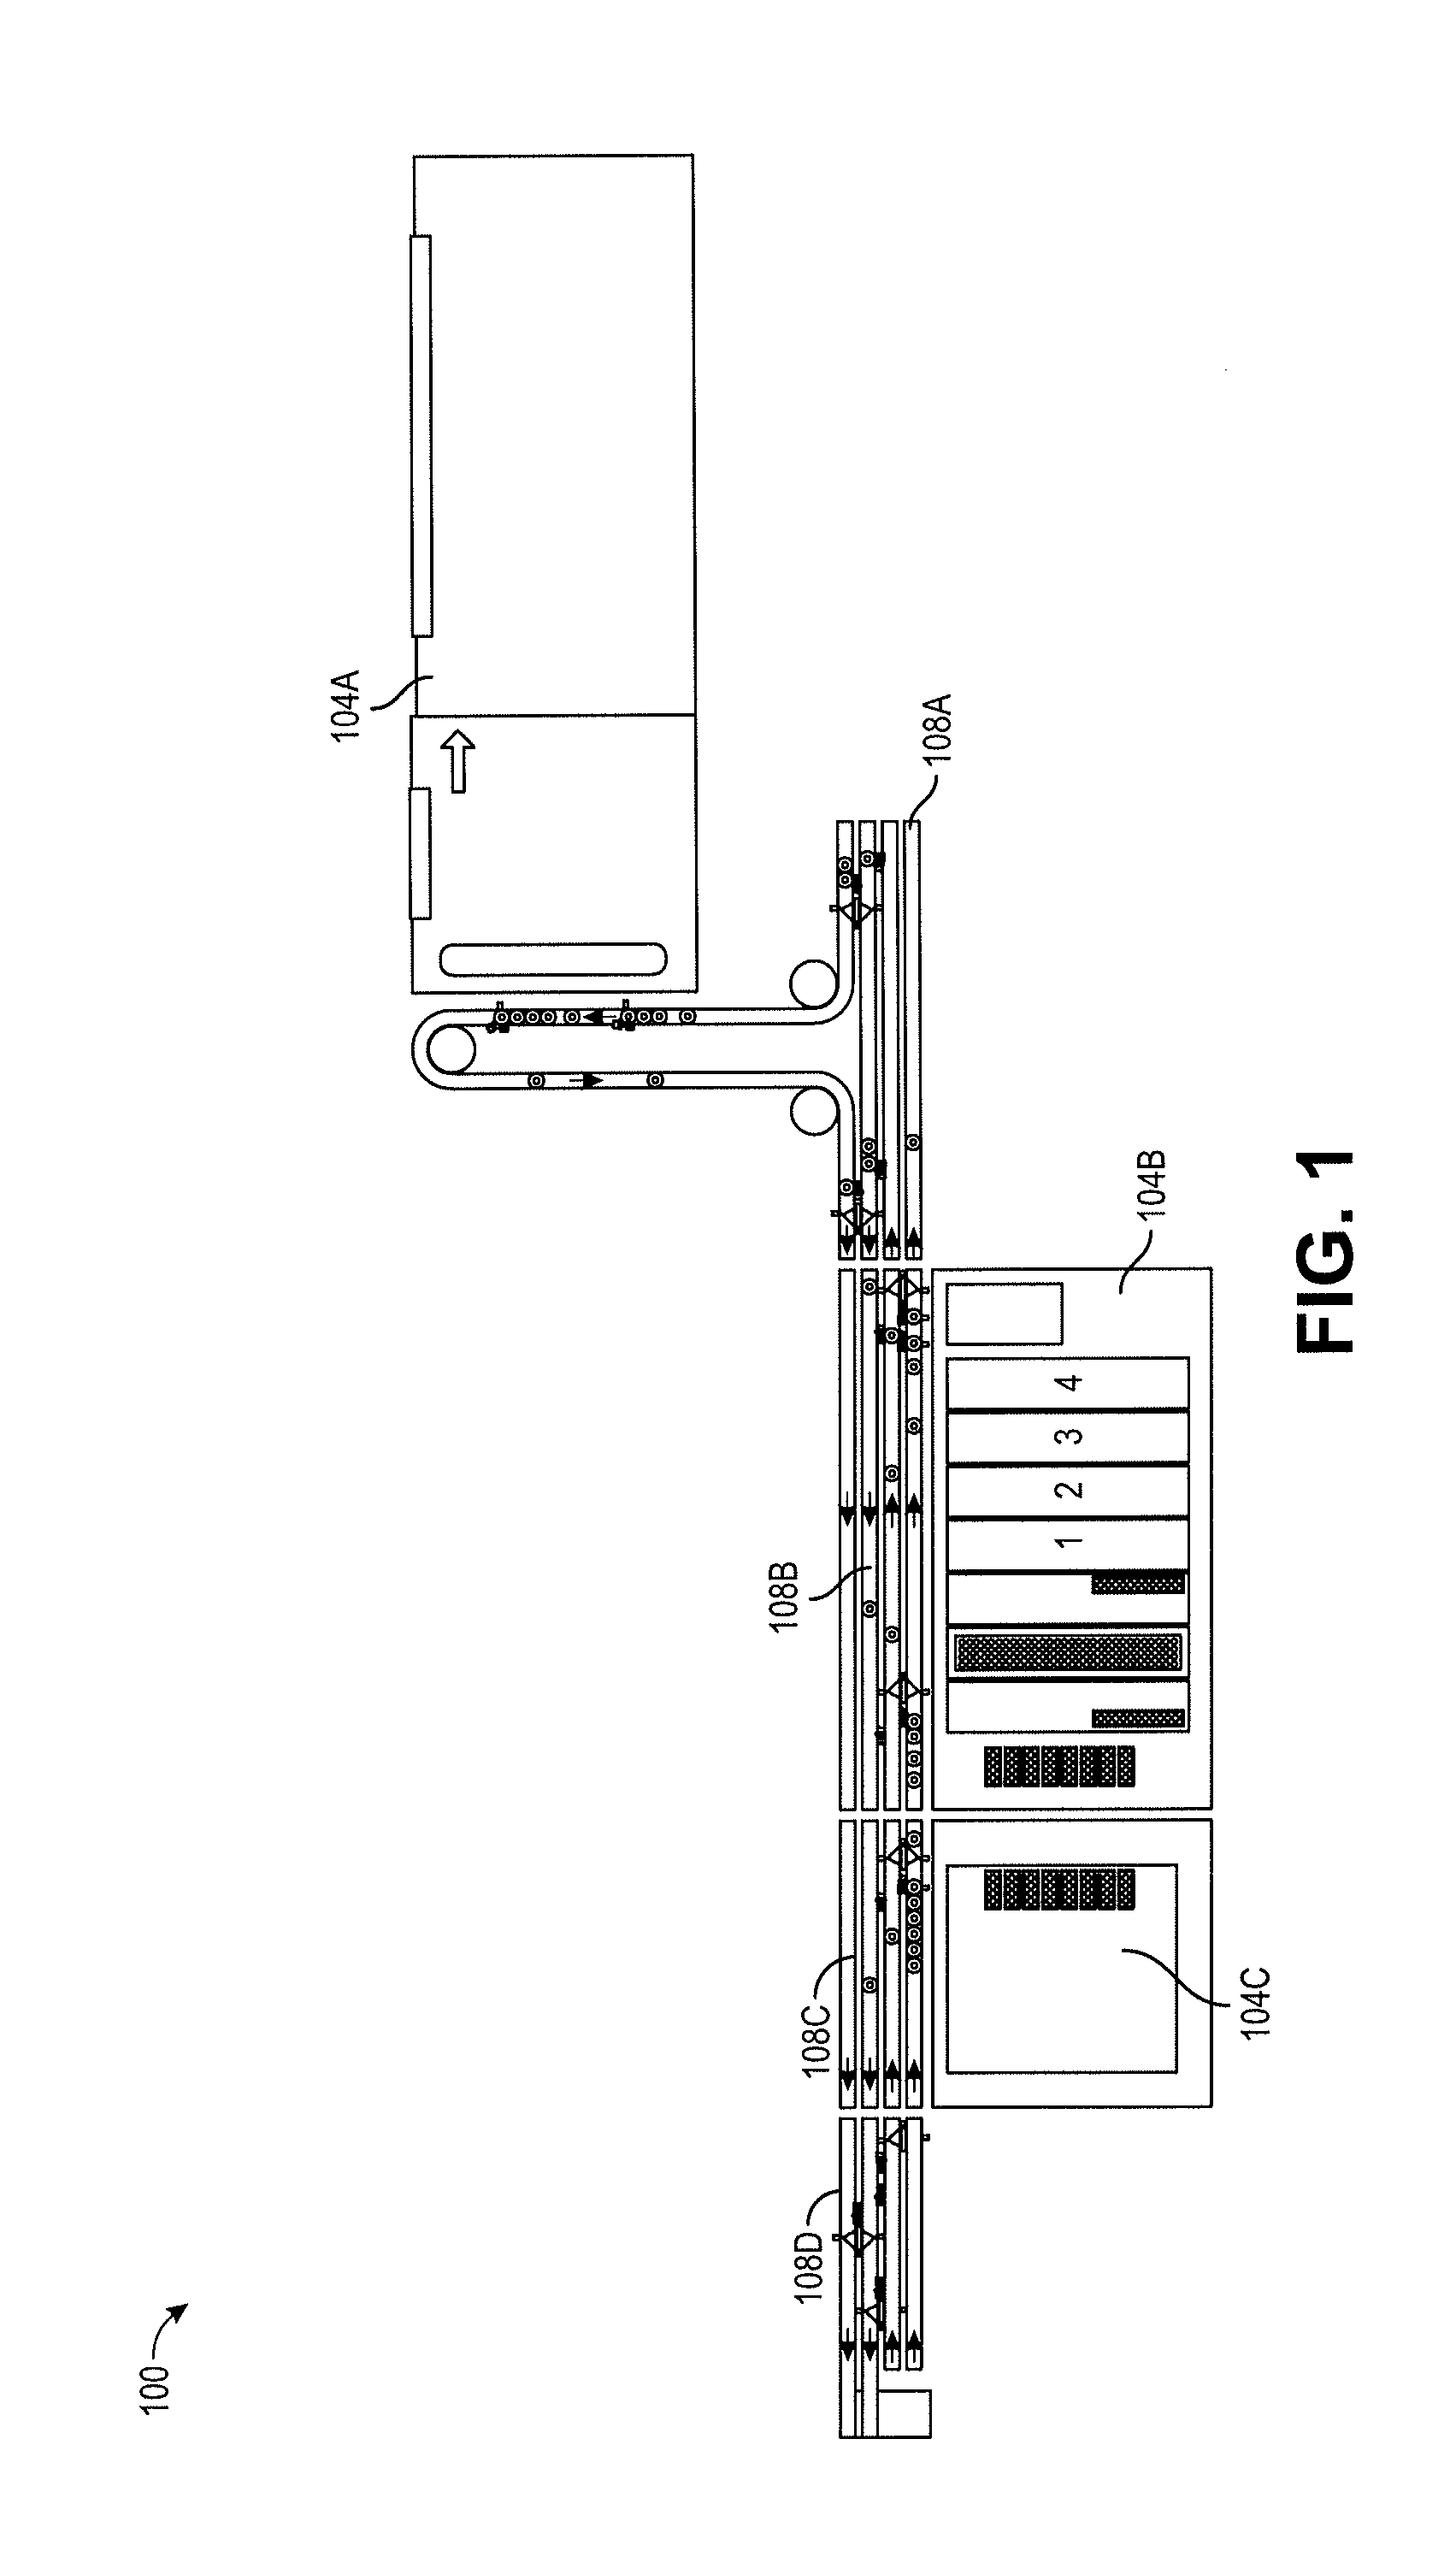 Method and system for forming site network